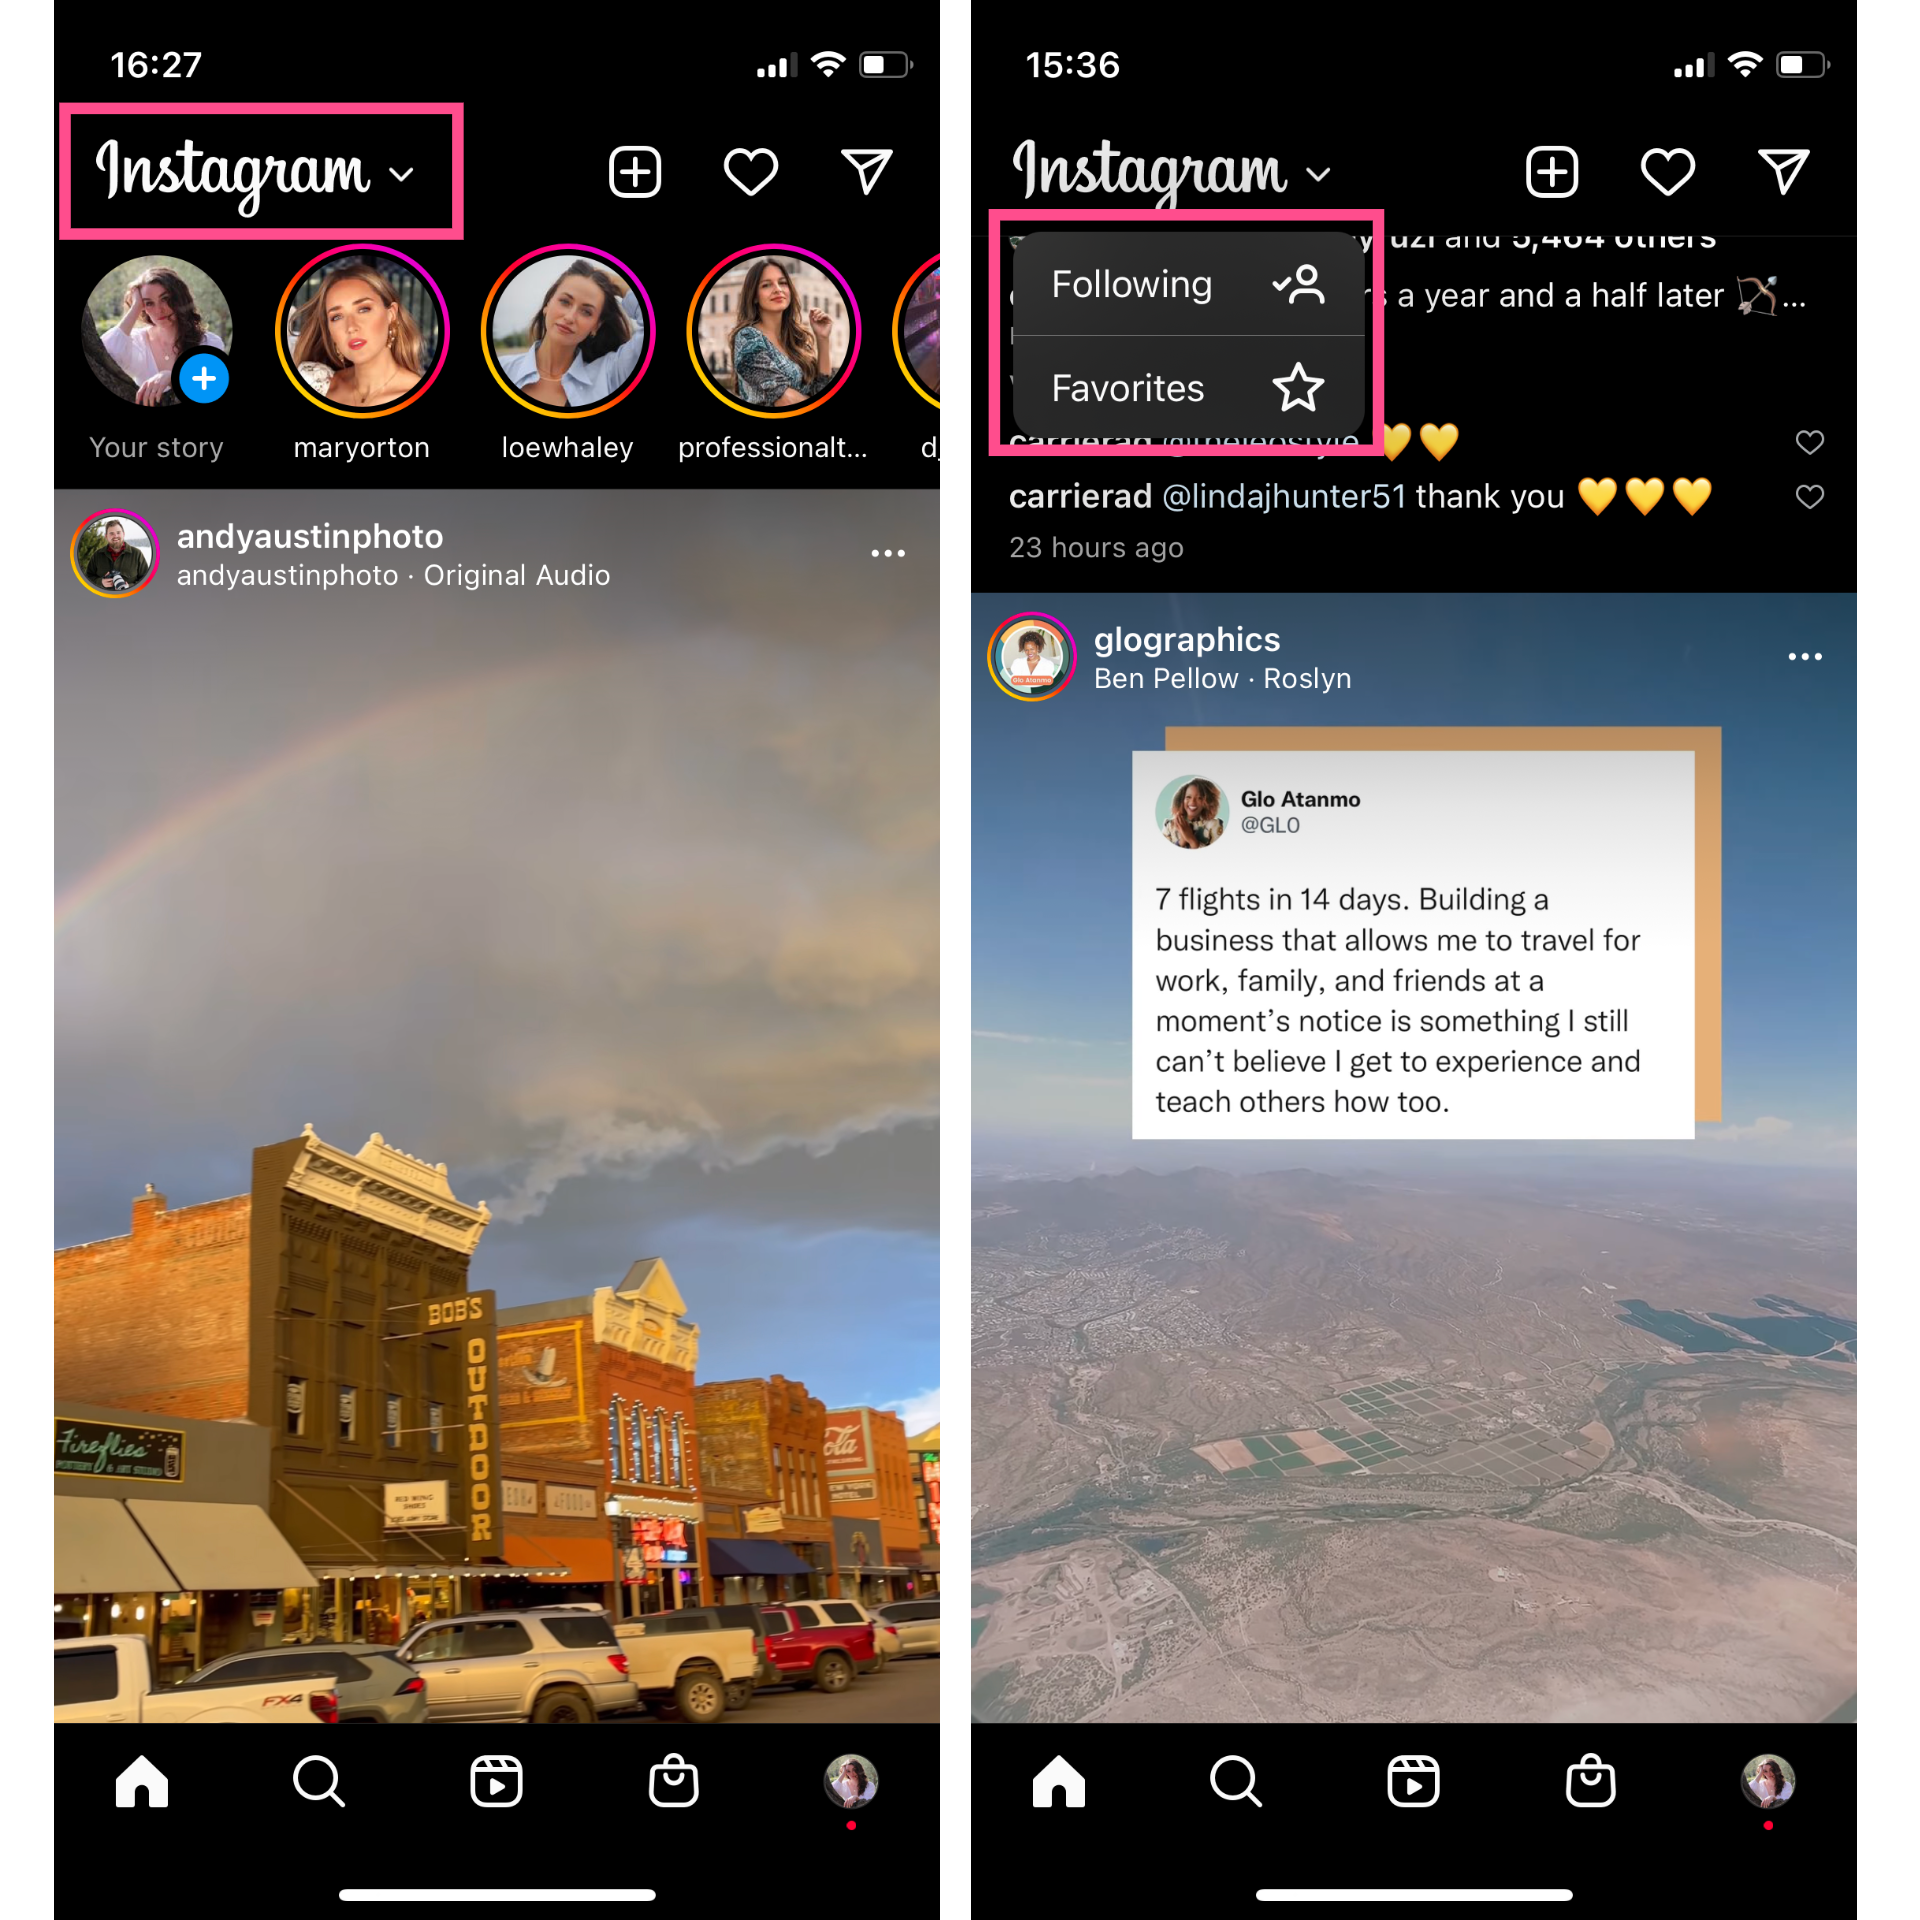 Instagram Adds Following and Favorites Chronological Feed Features